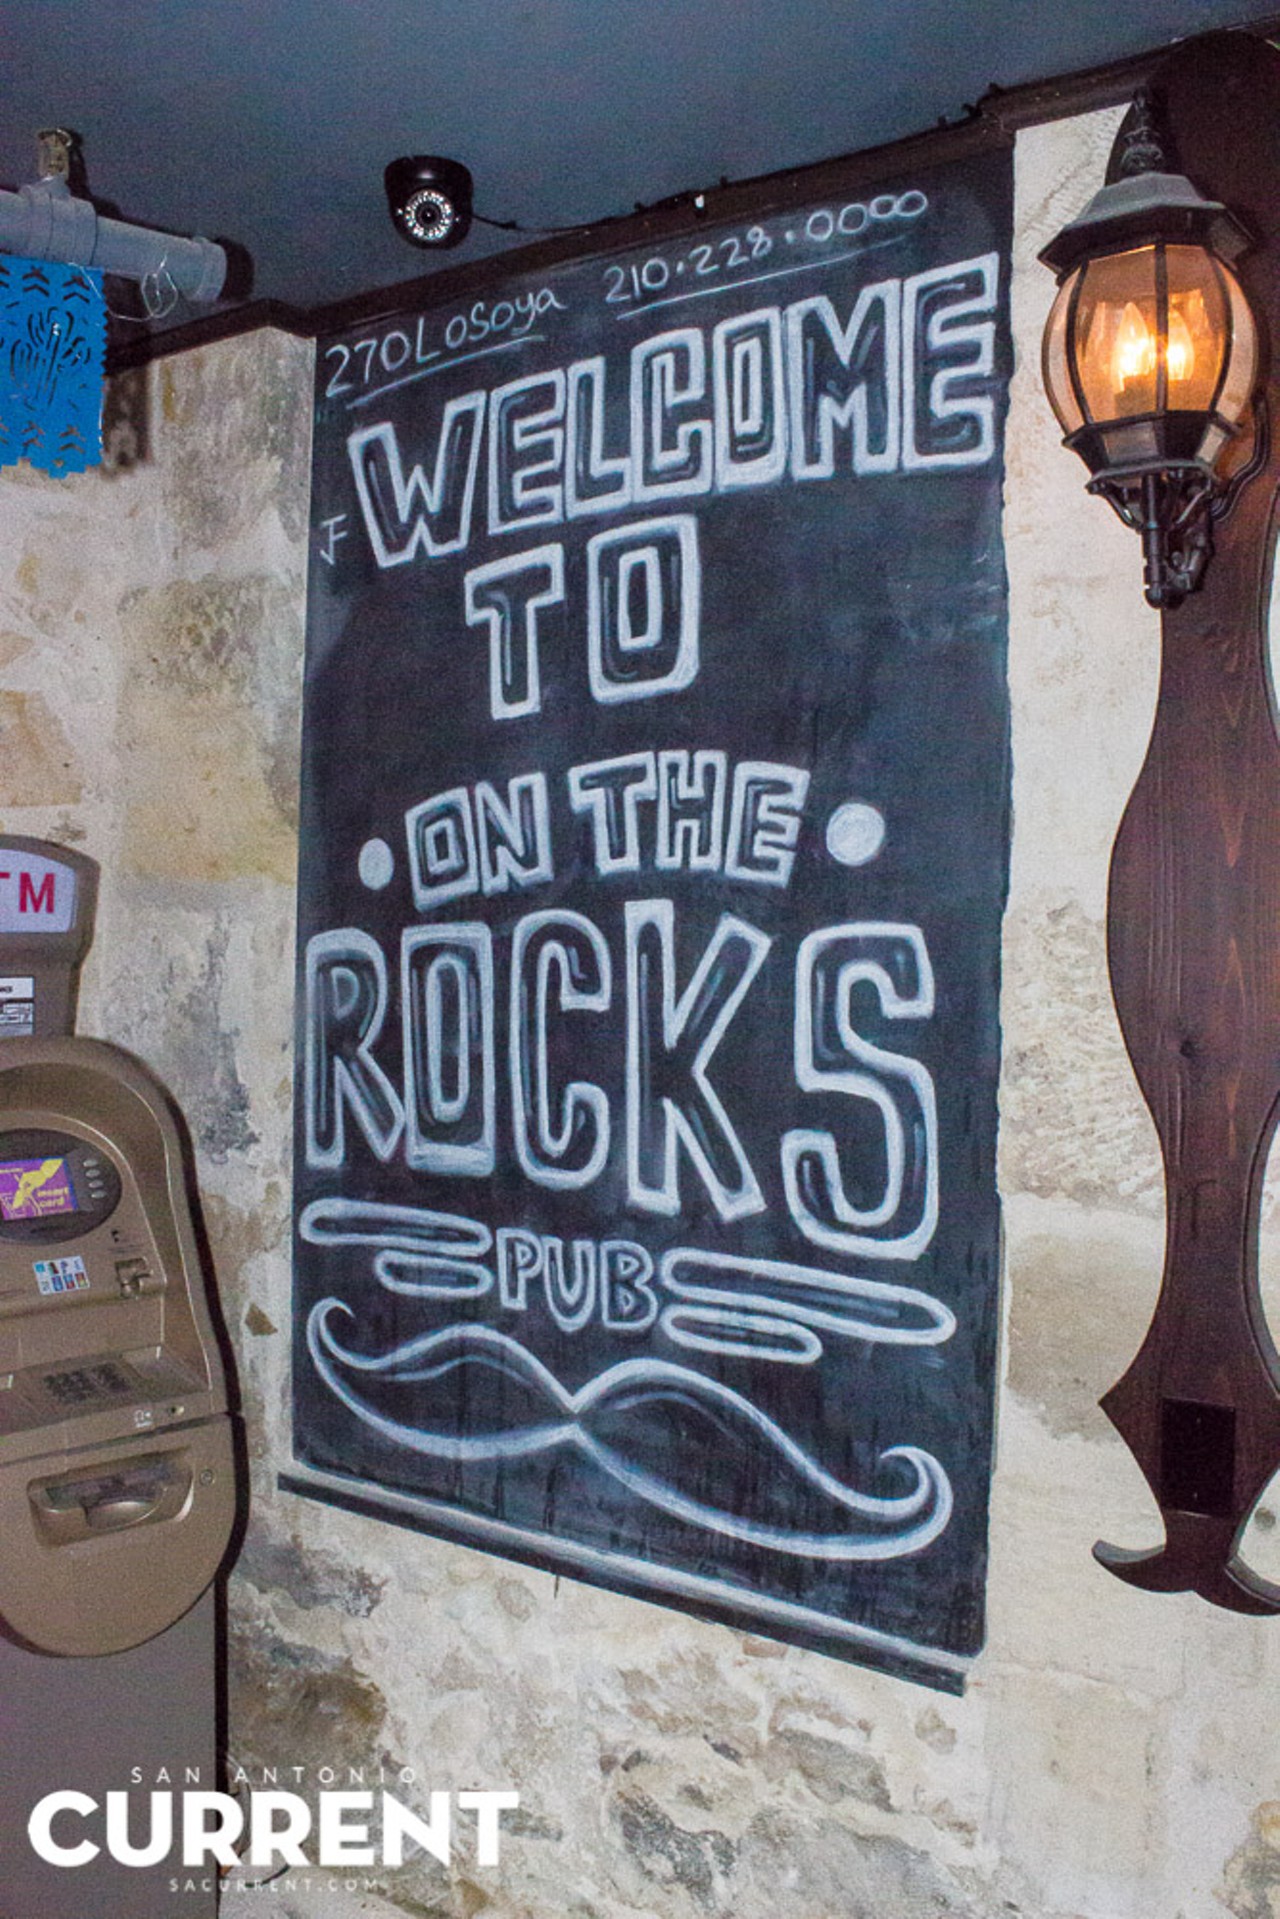 Fun Photos from On the Rocks' Fiesta Kick Off Event